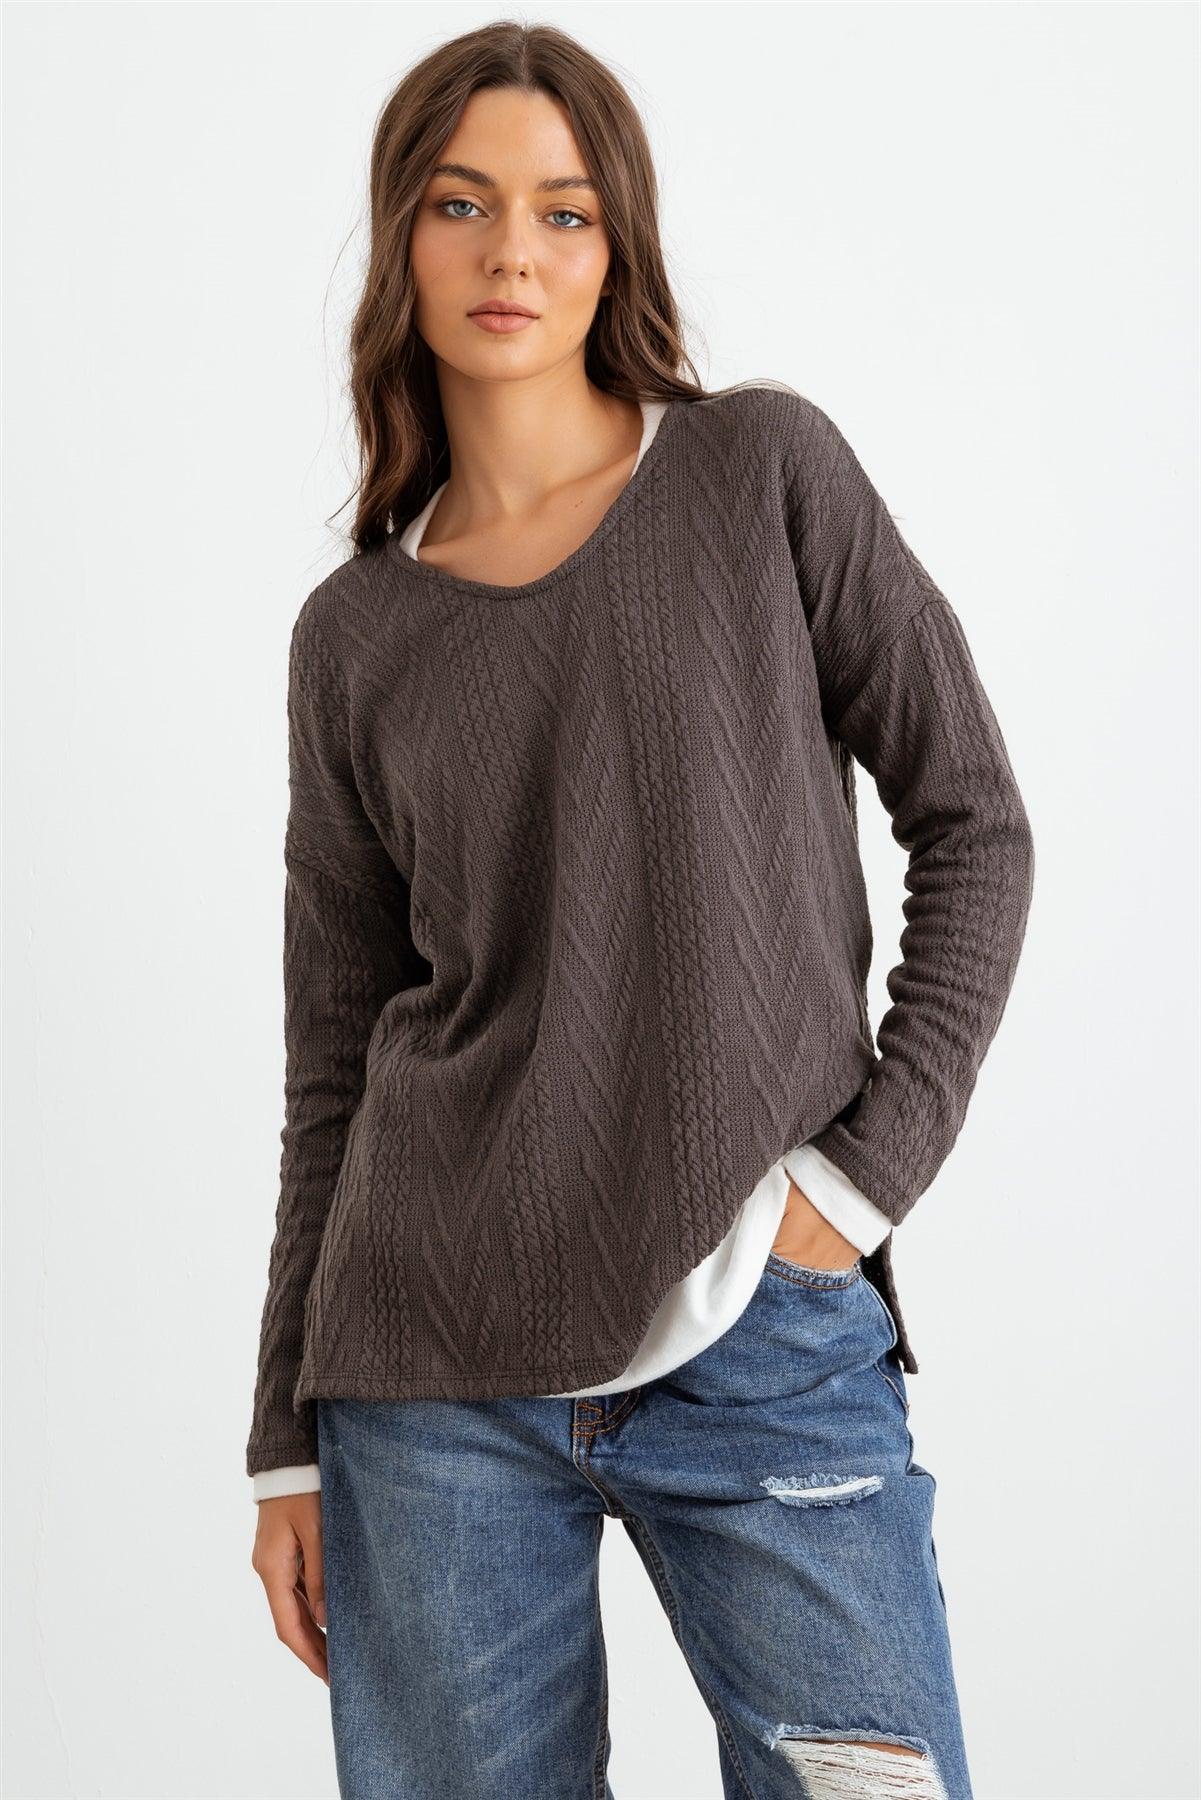 Charcoal Knit Round Neck Long Sleeve Top /1-1-1